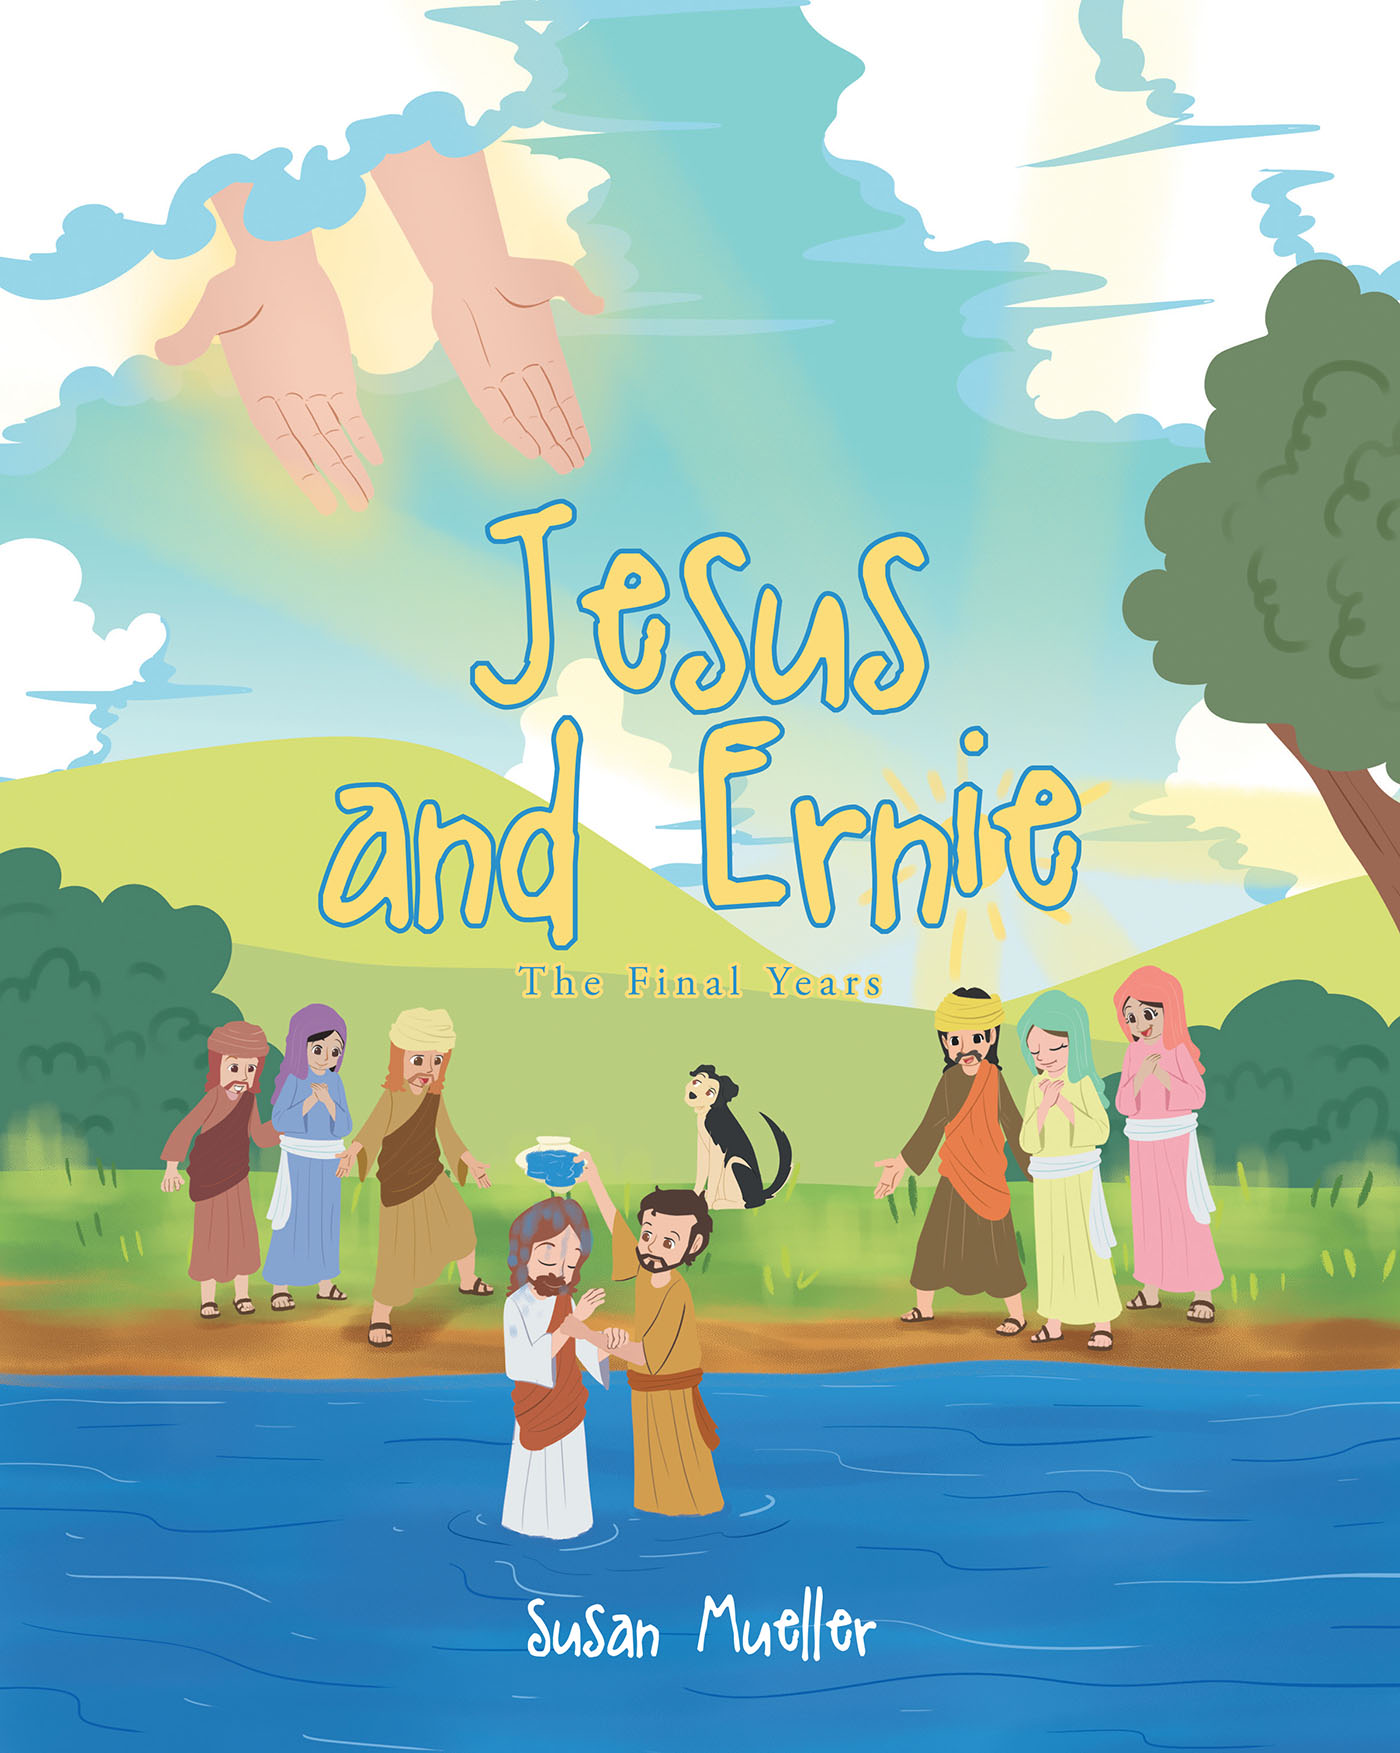 Susan Mueller’s Newly Released "Jesus and Ernie" is a Powerful Resource for Helping Young Believers Understand the Last Days of Jesus